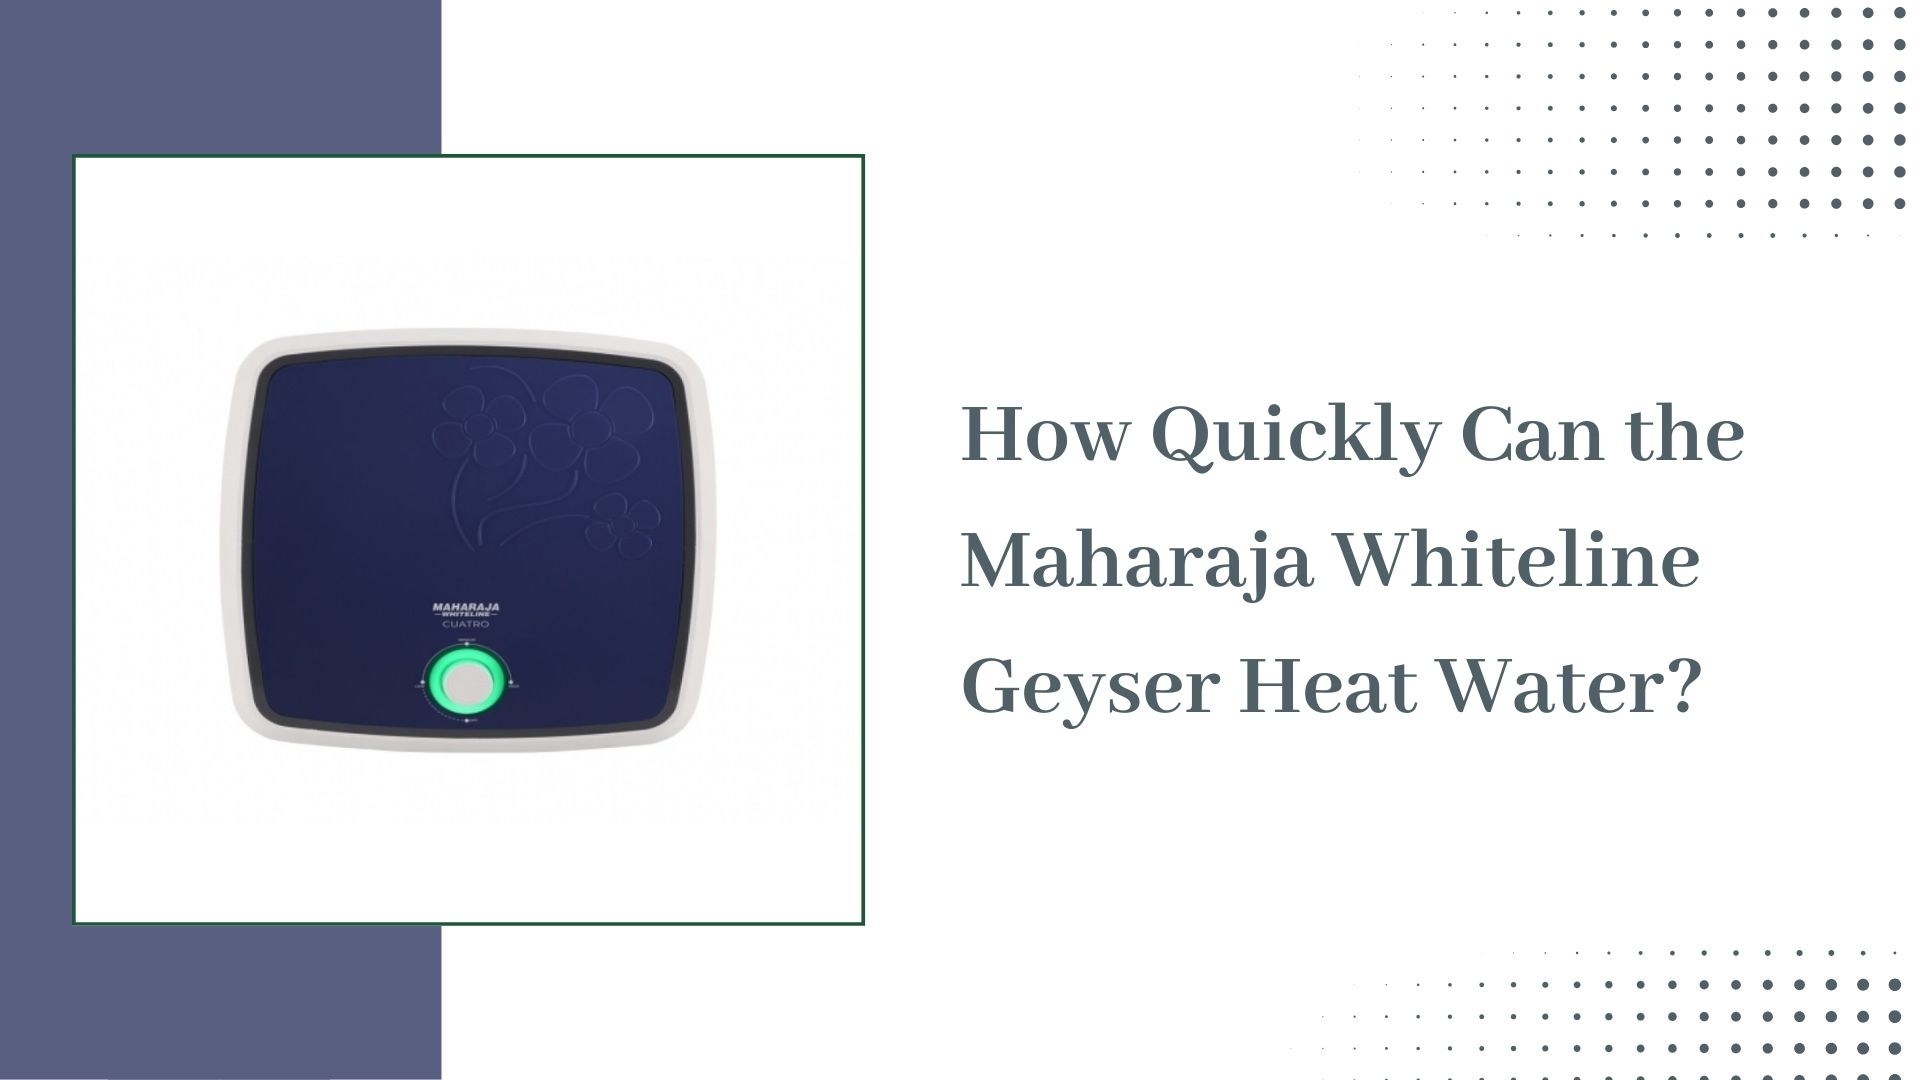 How Quickly Can the Maharaja Whiteline Geyser Heat Water?